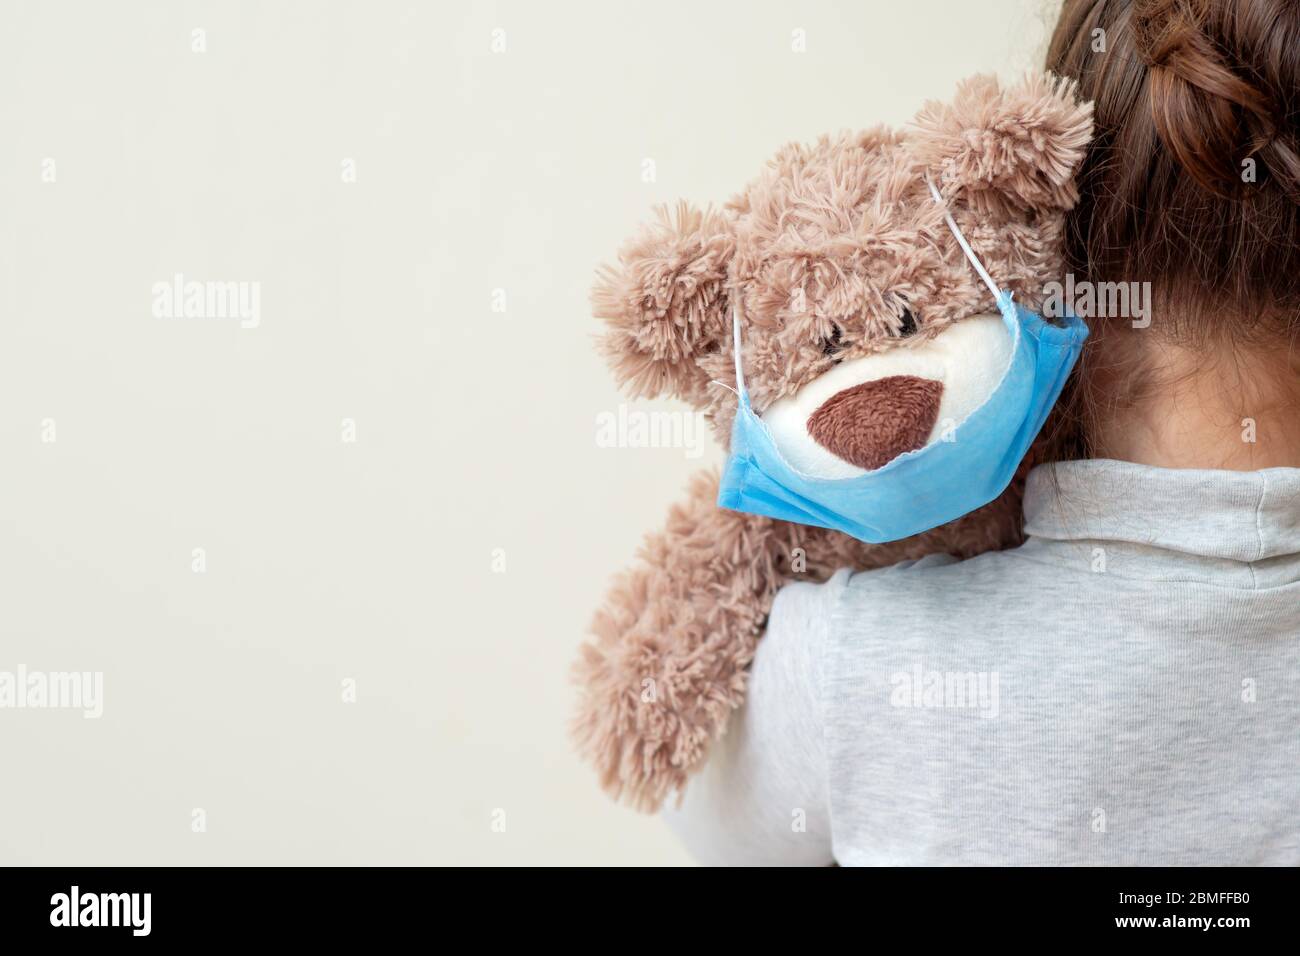 Soft toy bear with protective medical mask on child shoulder. Health care and virus protection concept. Stock Photo